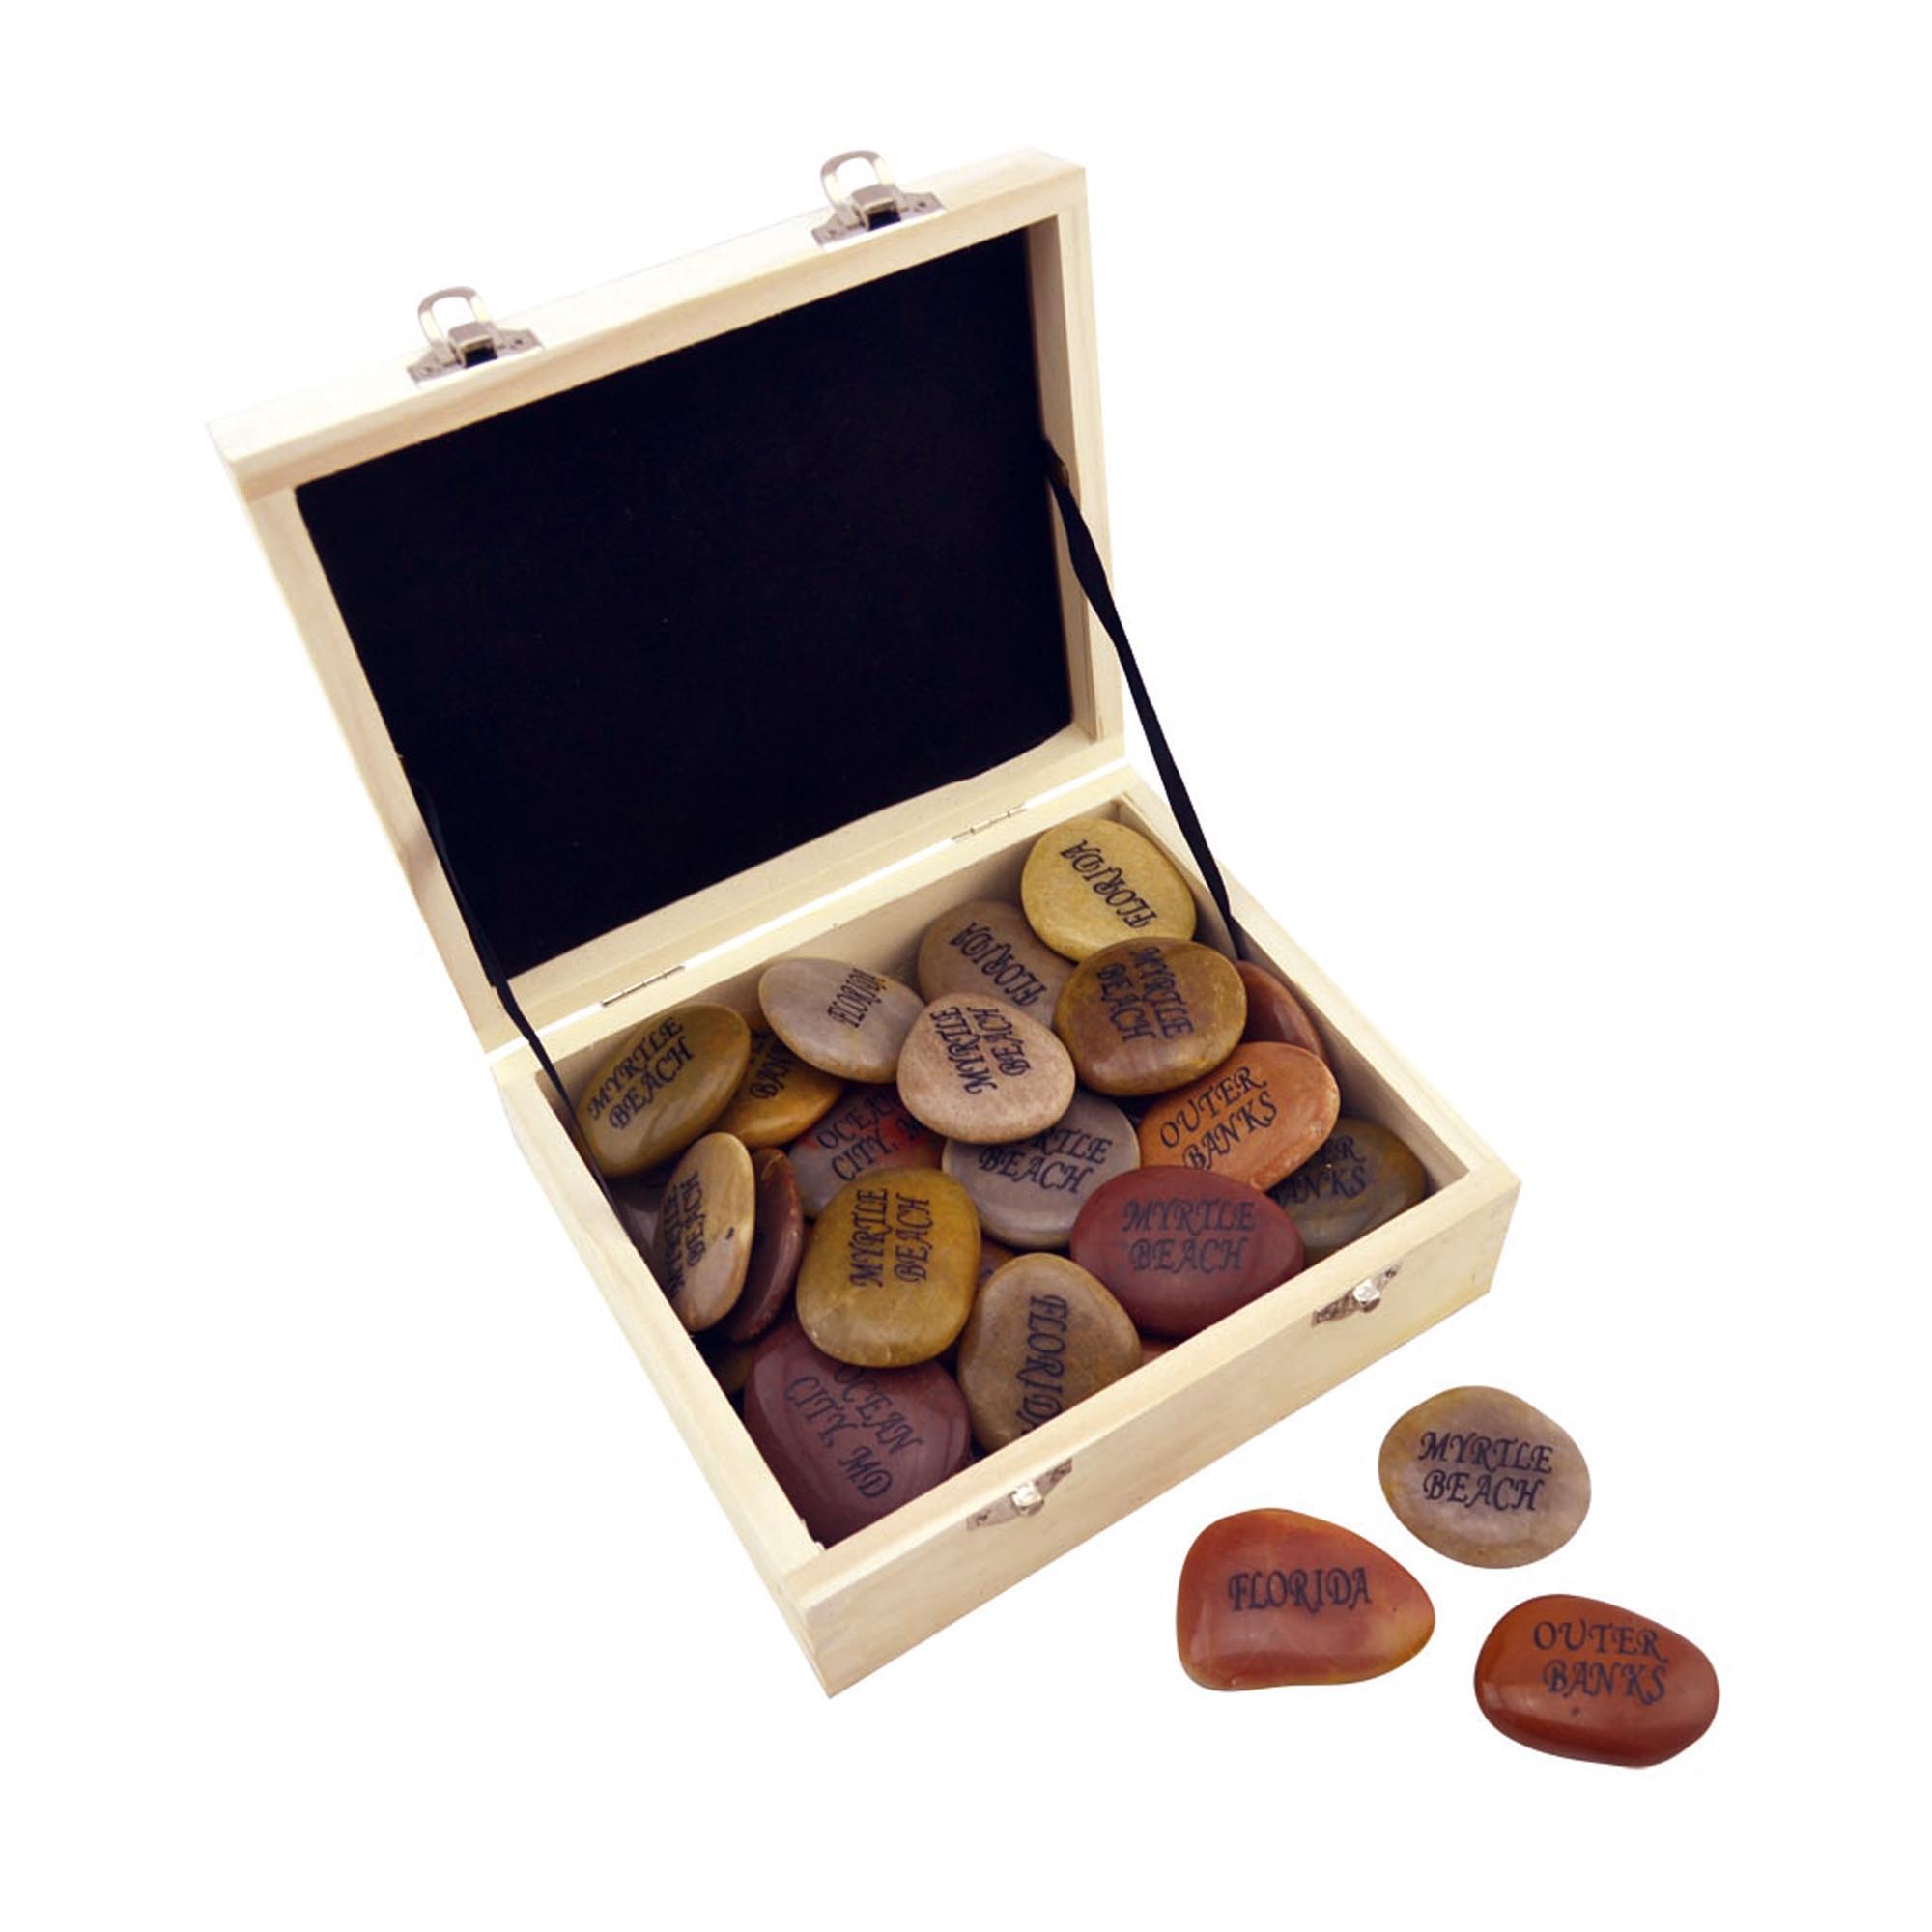 Pebble stone natural pebble with customize engravment in wooden display box